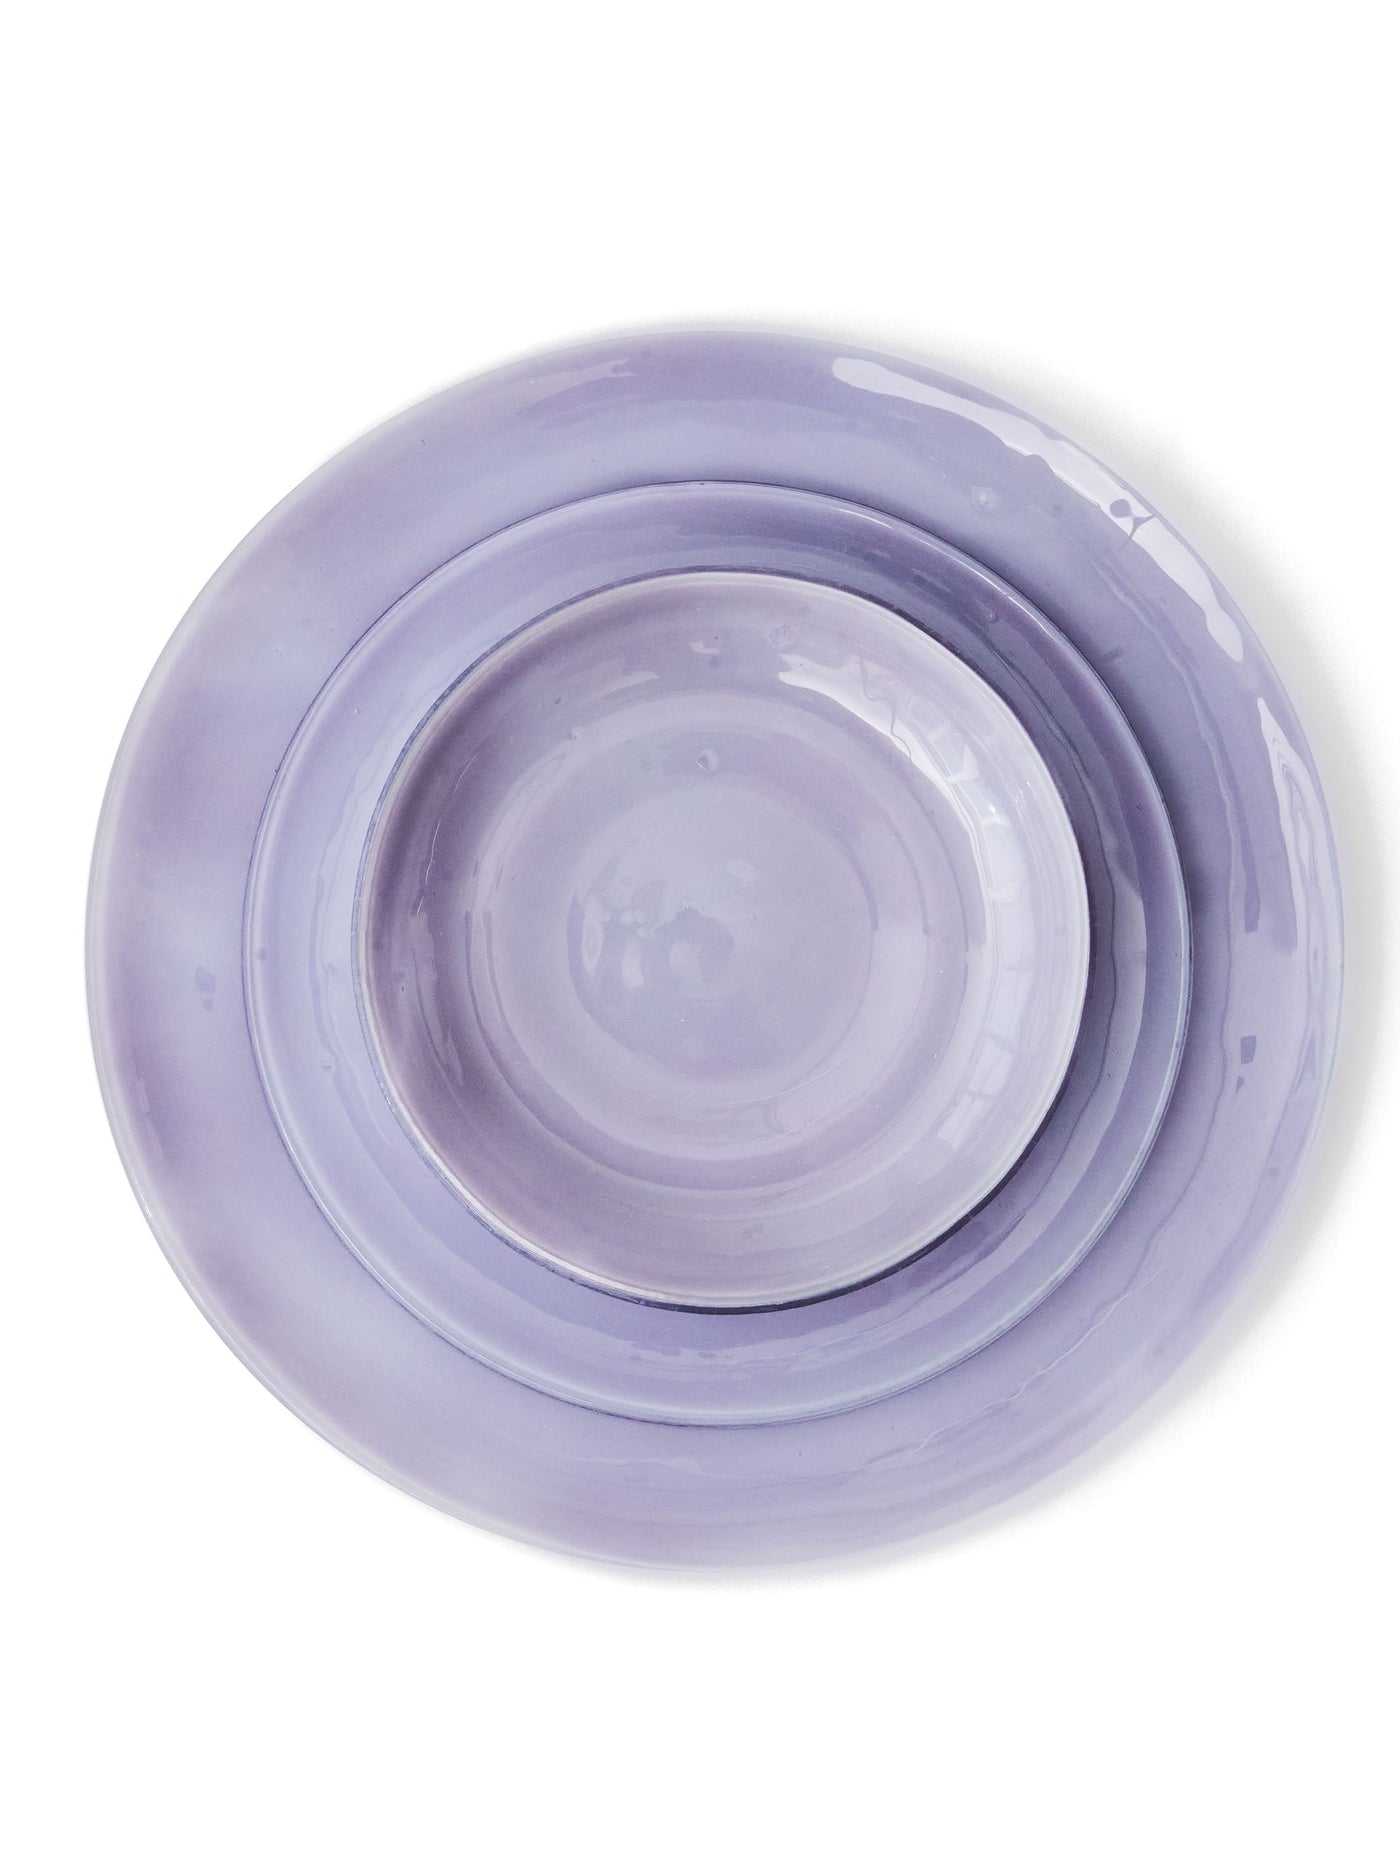 Glass Dinnerware in Lavender by Caju Collective